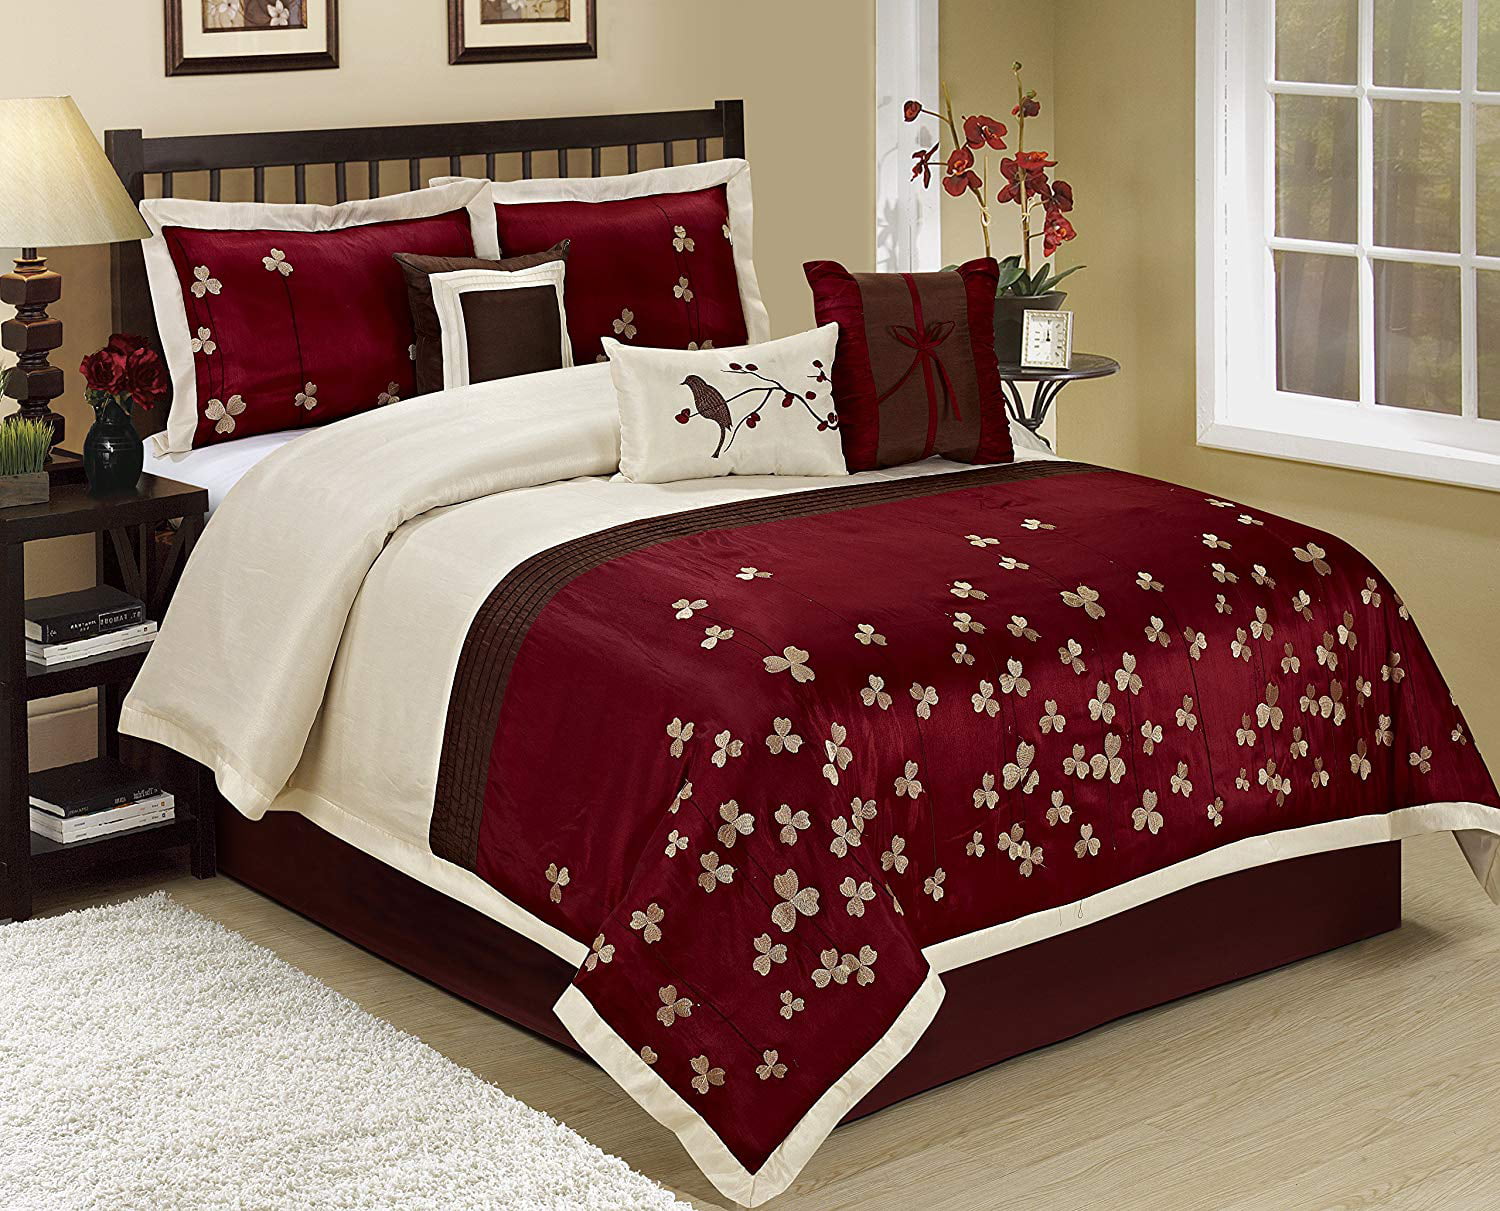 King & Cal King Full Queen 7 pcs Comforter Set with Embroidered Design  Twin 